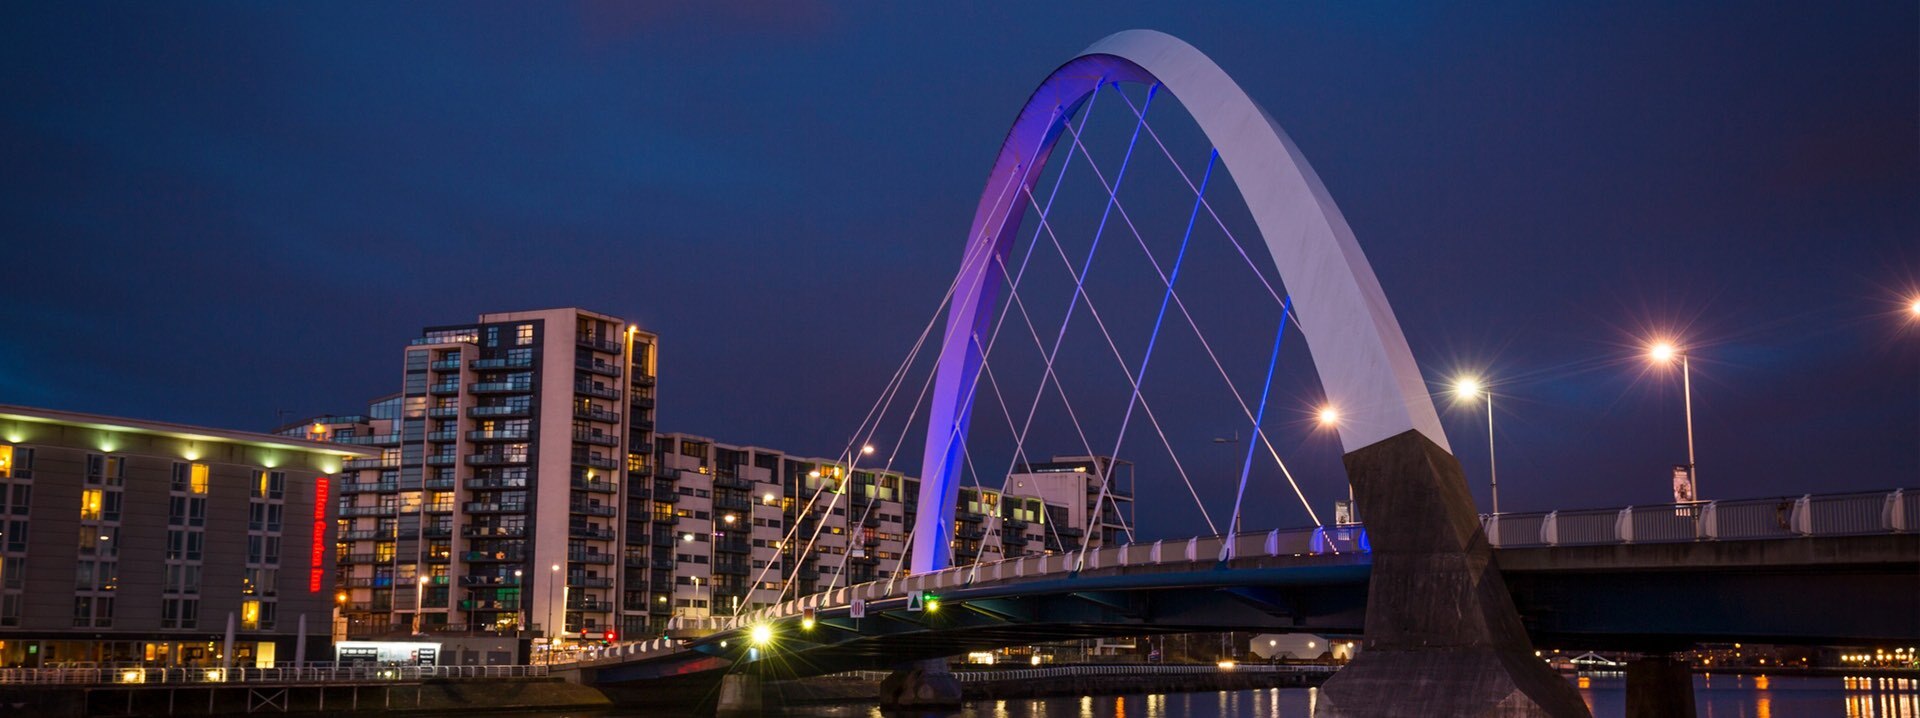 The Clyde Arc bridge and buildings lit up at night